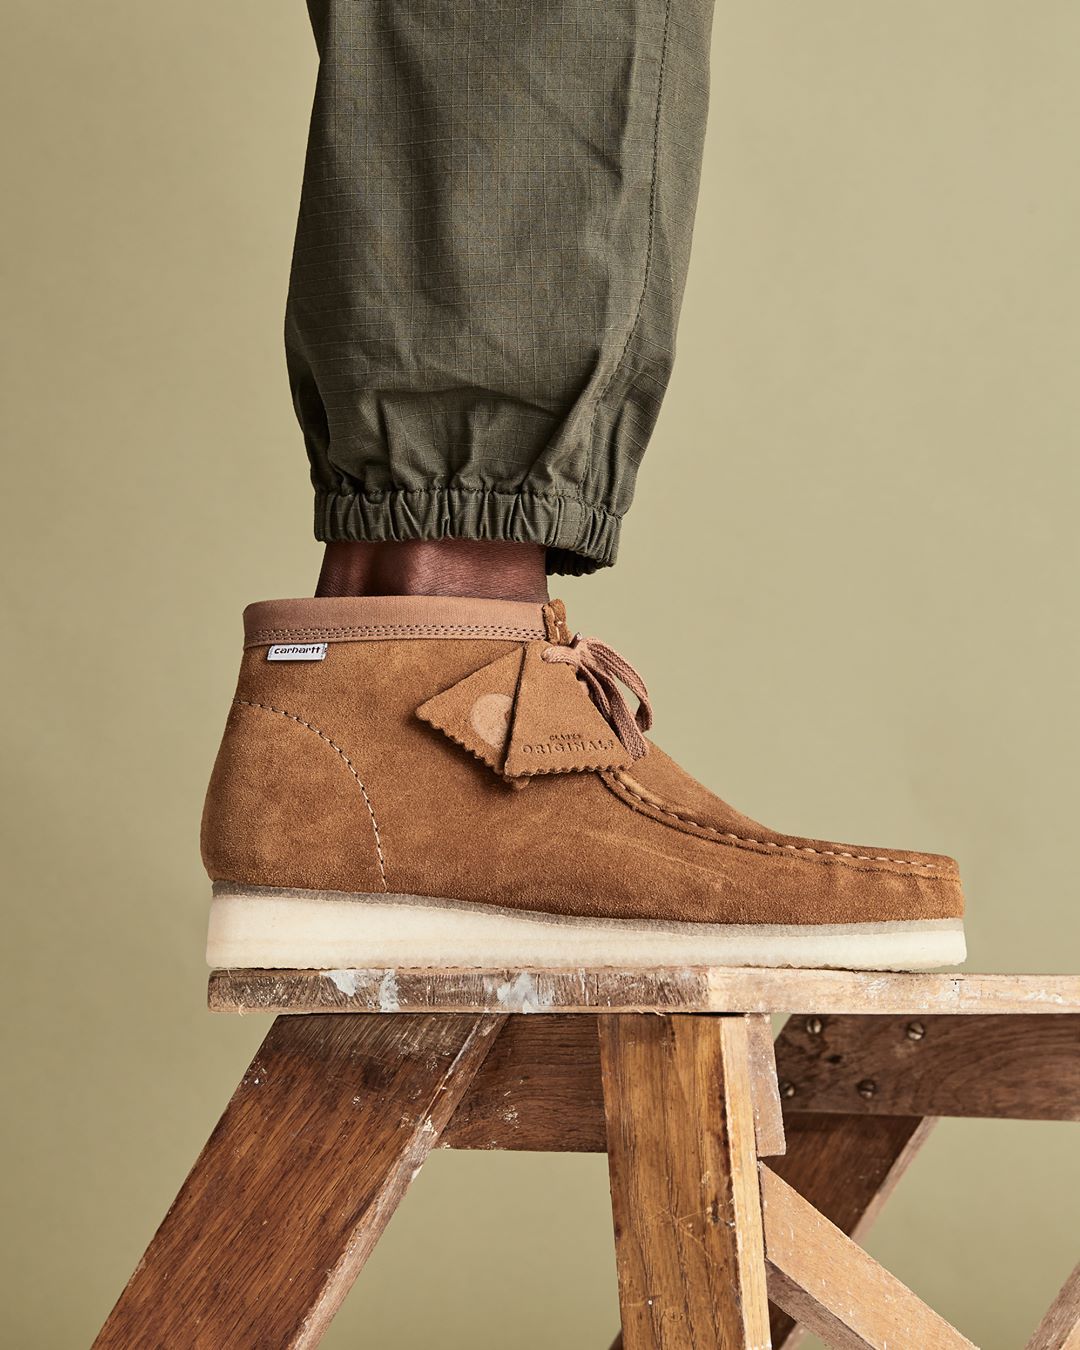 højdepunkt Tøj Endeløs KicksFinder on Twitter: "Ad: Dropping in 20 minutes with global shipping! Carhartt  x Clarks Wallabee "Brown" SNS https://t.co/BbVteb5Fqu Afew  https://t.co/2SpIRnFOV0 Allike https://t.co/chRvQl1YjR 43  https://t.co/7cGp2x1nFz BSTN https://t.co/YpQHXHuweg ...